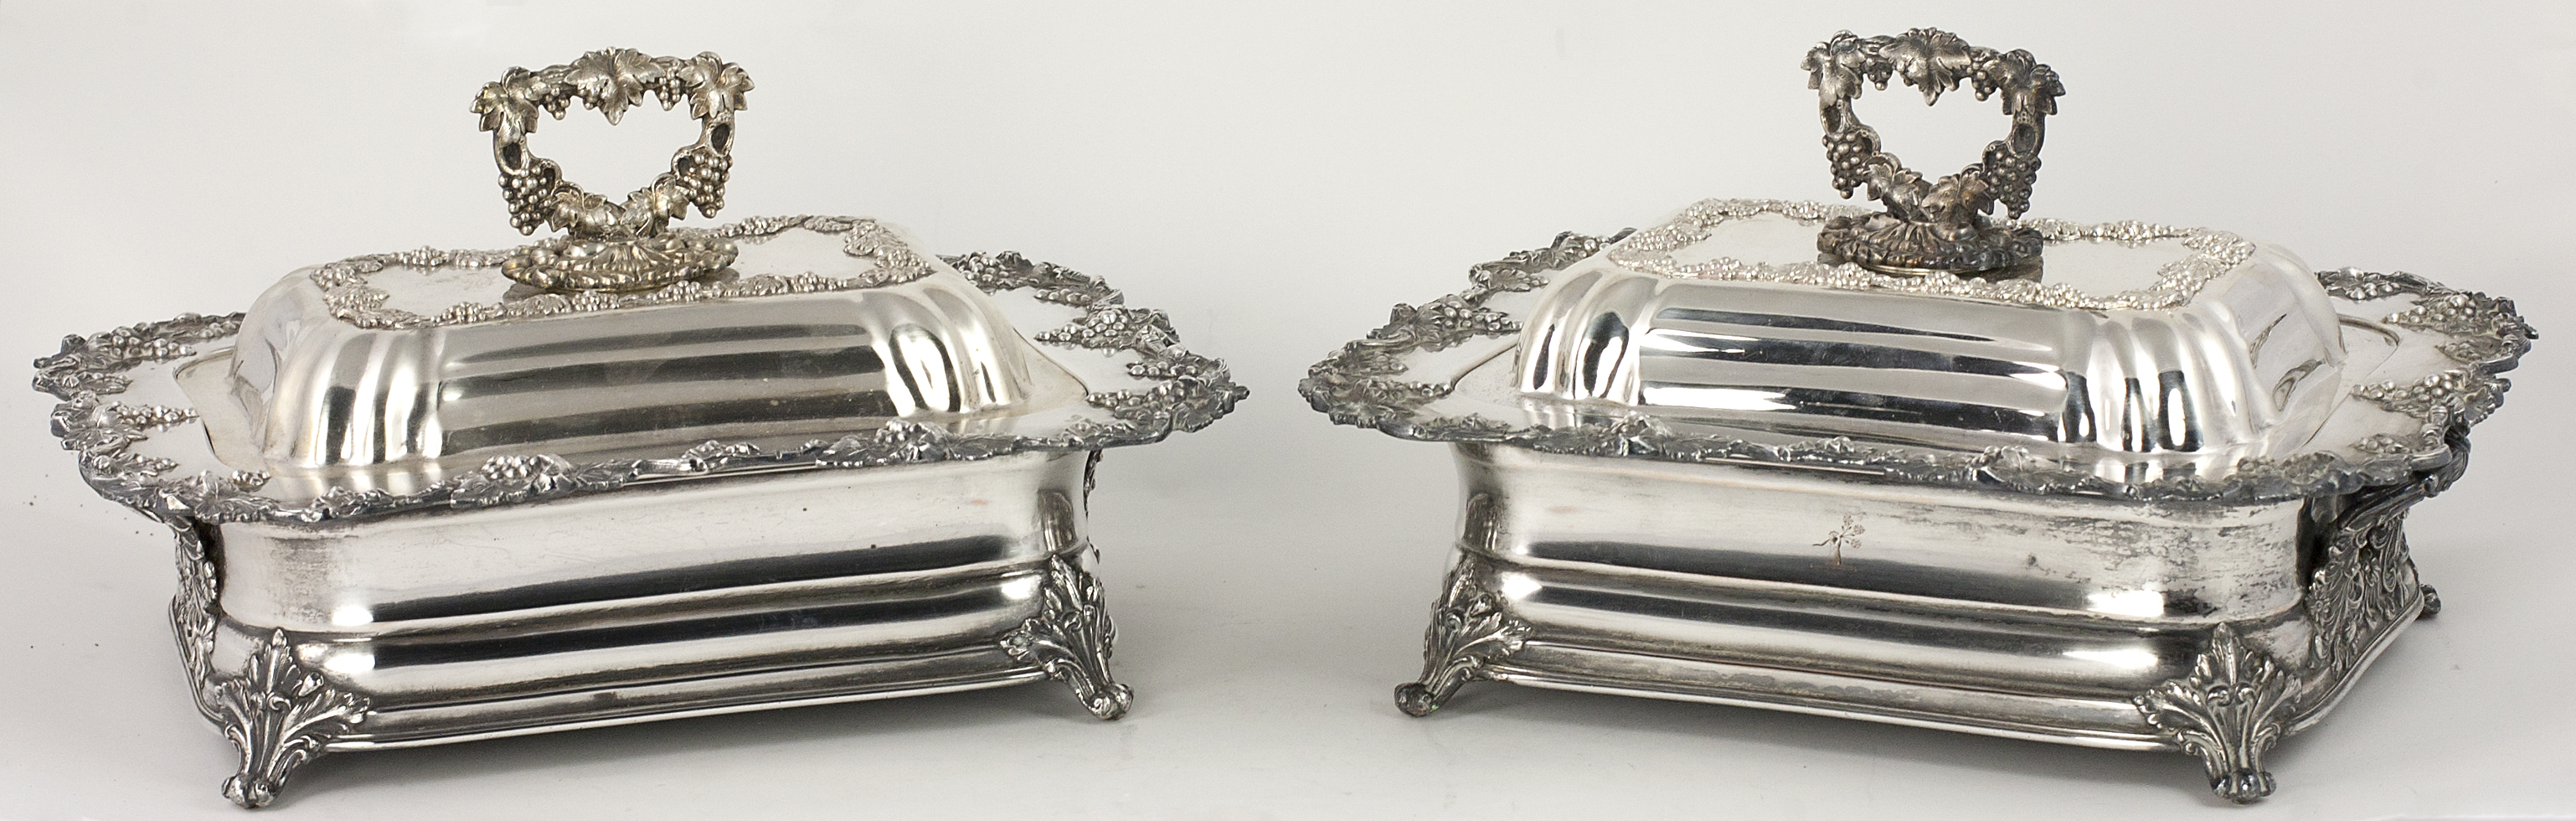 An extremely fine pair of unusual large silver plated Entree Dishes, Covers and Hot Water Stands, - Image 2 of 8